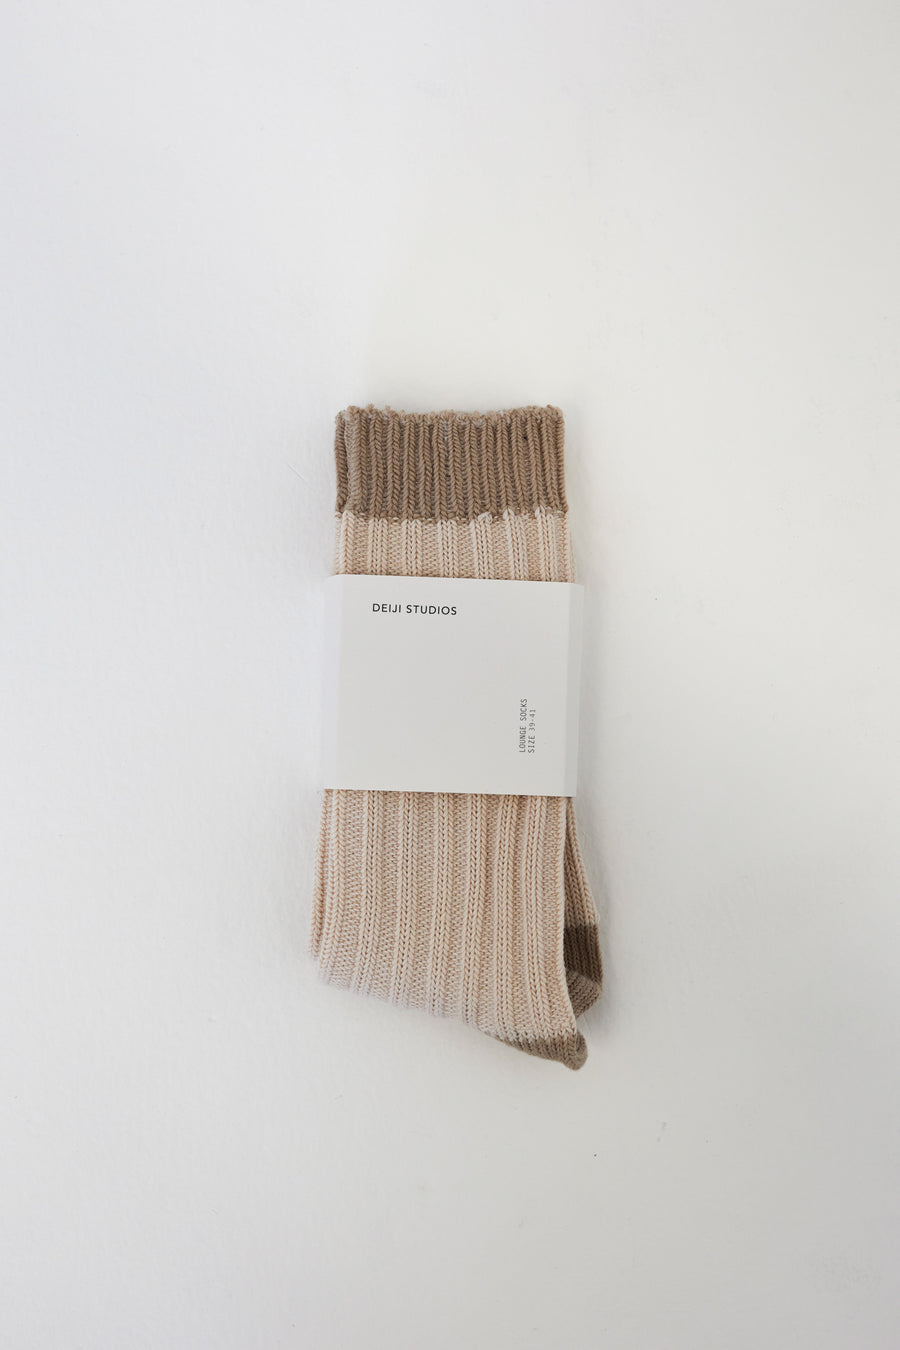 The Woven Sock- Cream and Natural